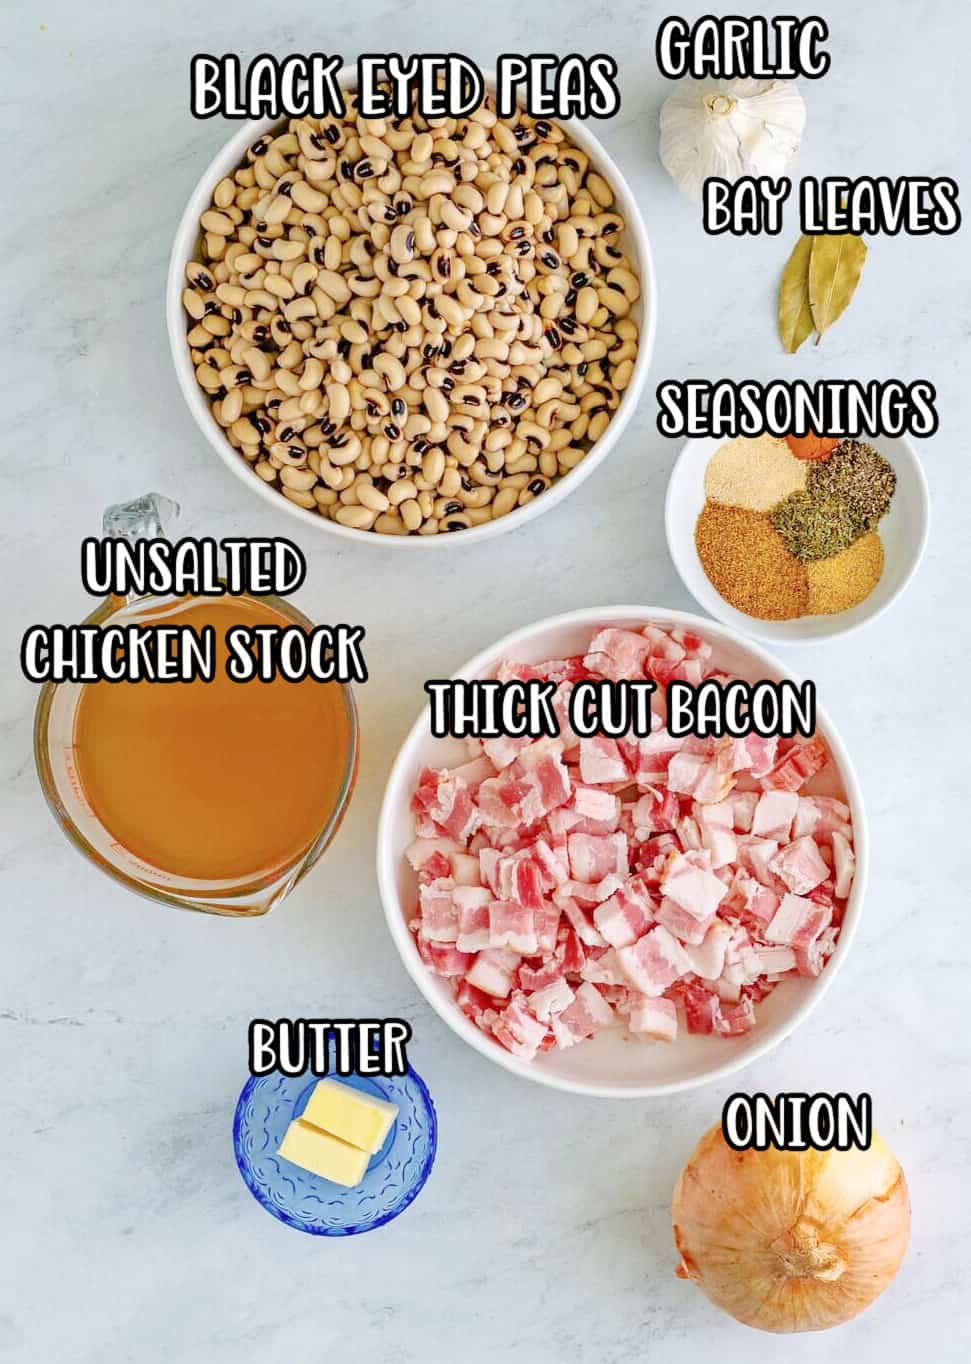 Ingredients needed: thick-cut bacon, sweet onion, garlic, seasoned salt, garlic powder, onion powder, dried thyme, pepper, cayenne pepper, dried black-eyed peas, unsalted chicken stock, bay leaves, unsalted butter and parsley, optional.